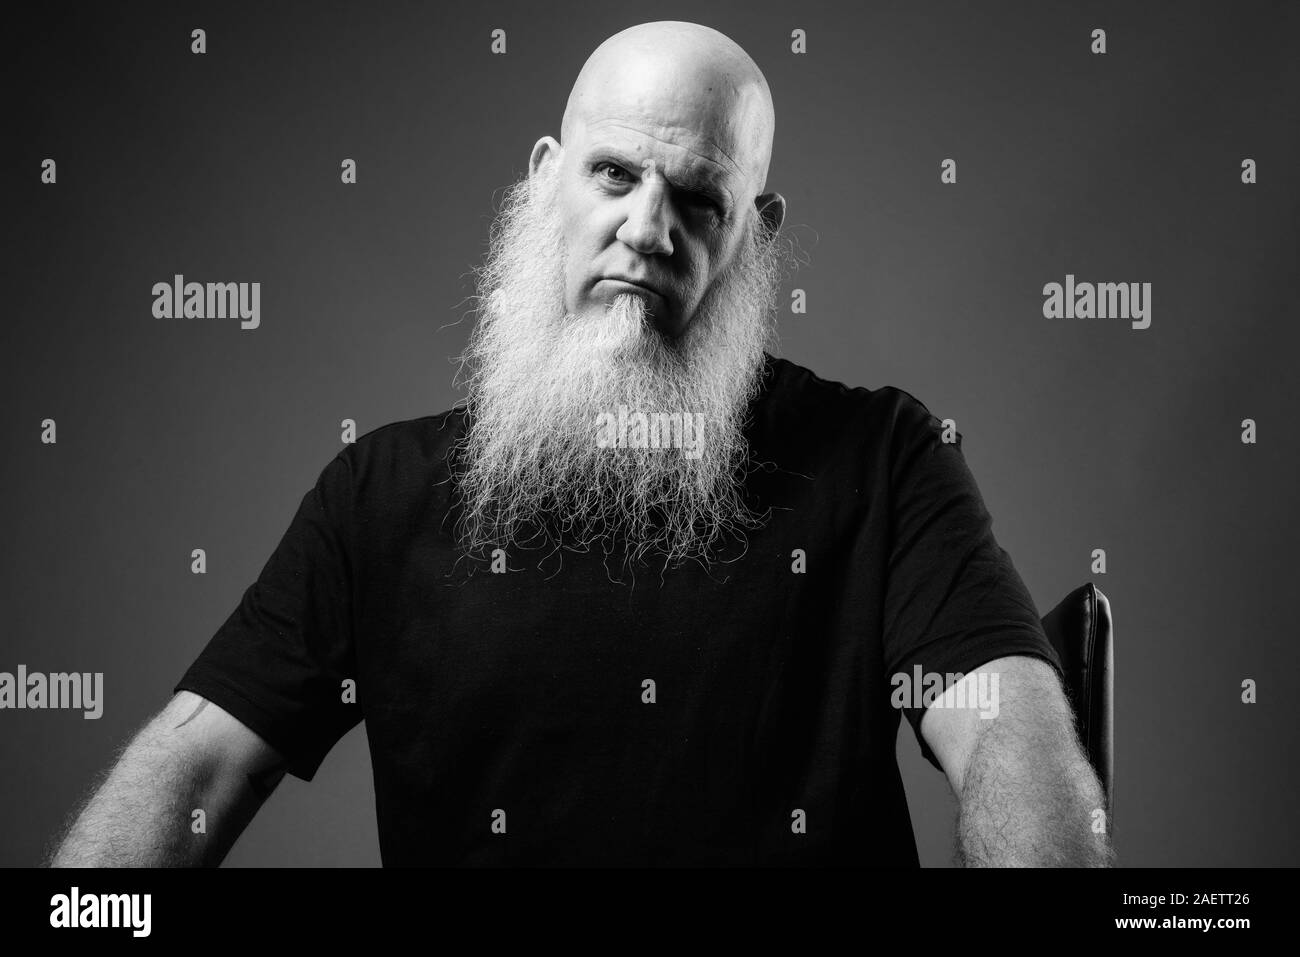 Mature bald man with long white beard in black and white Stock Photo